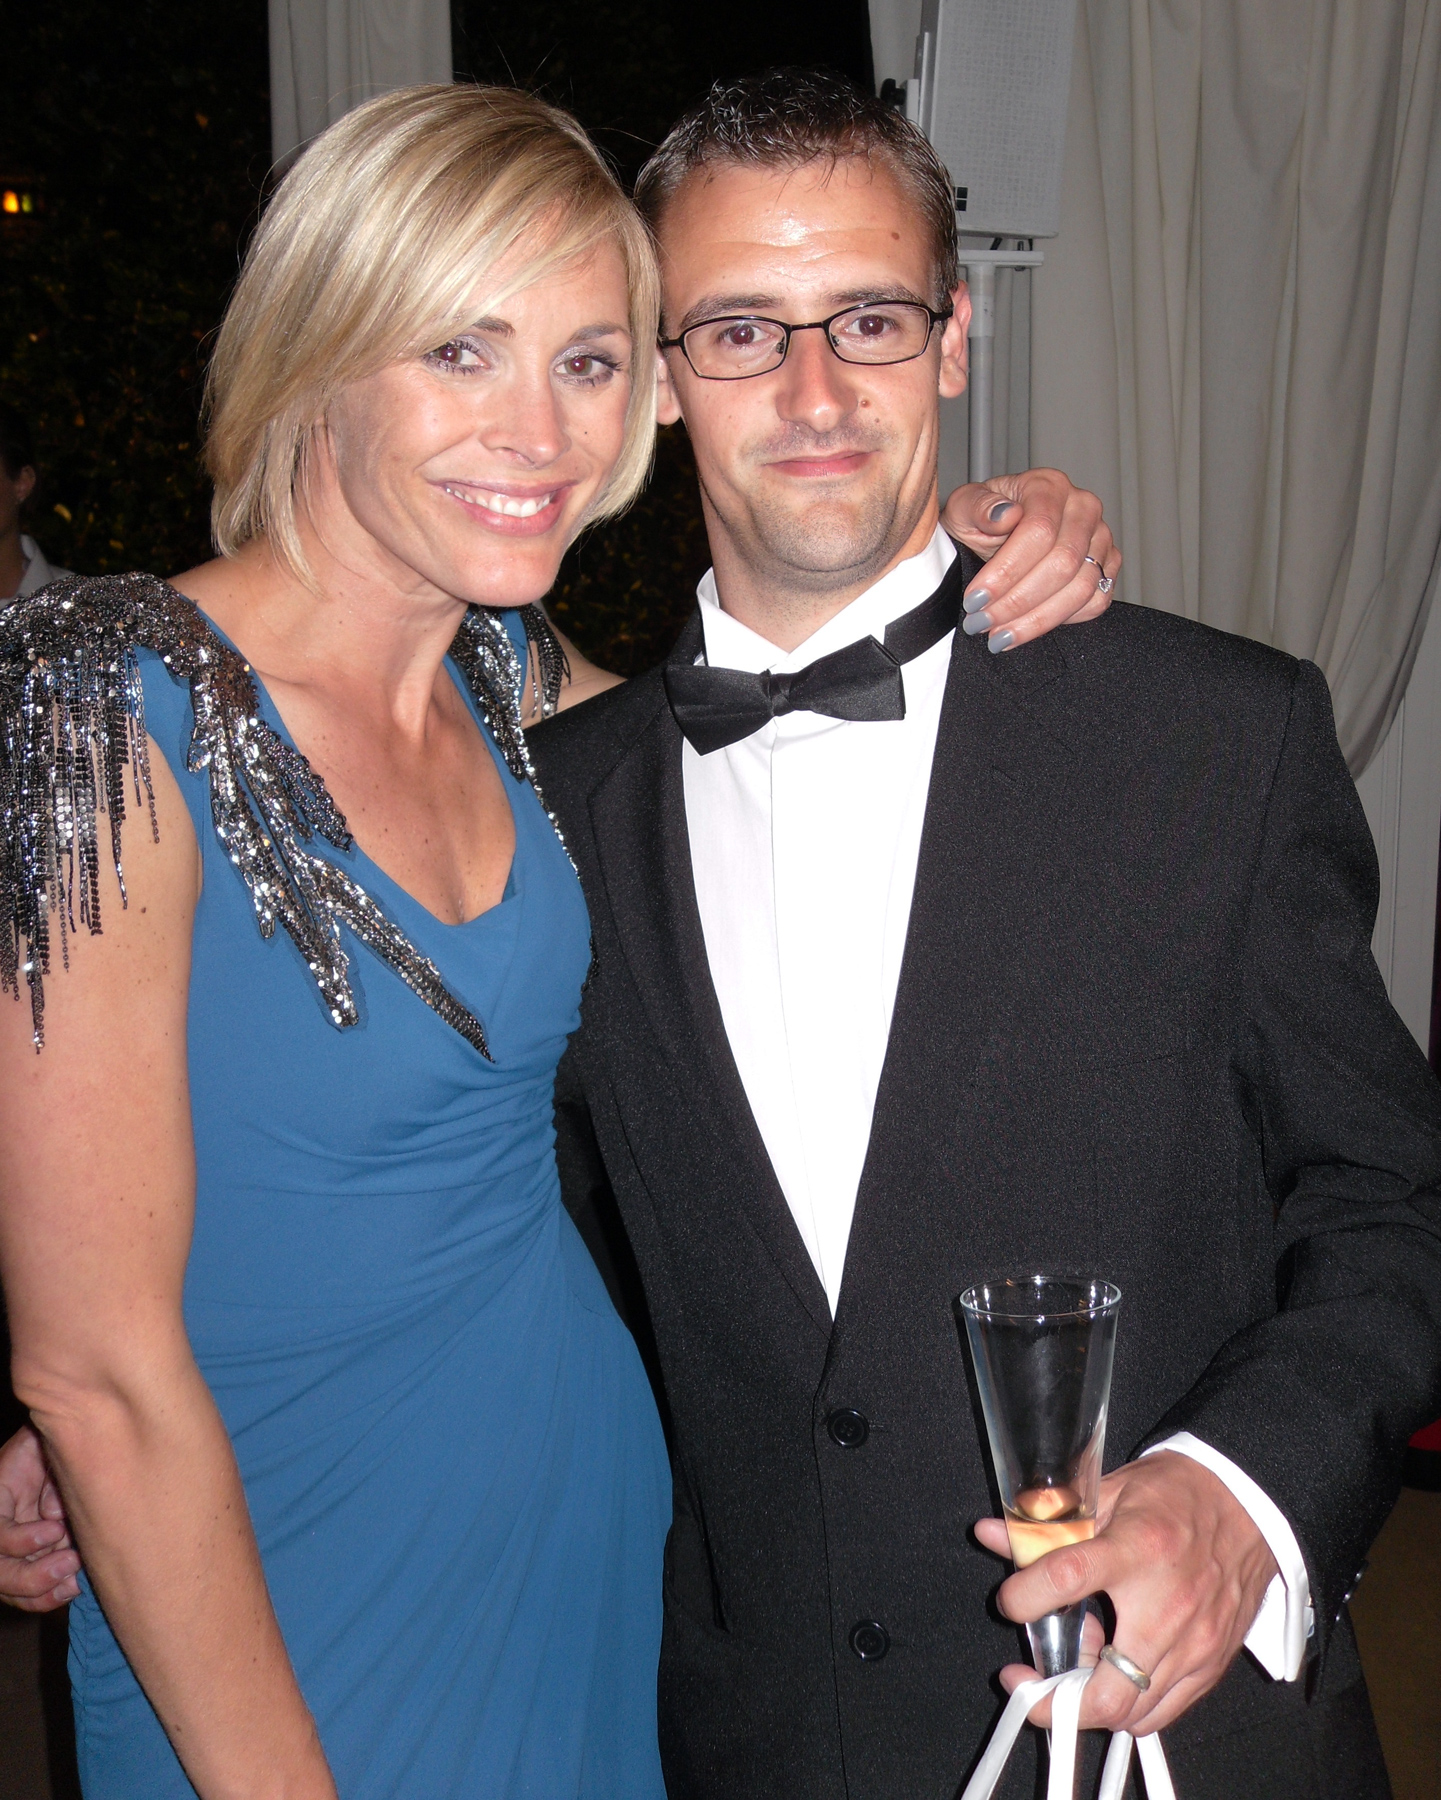 Producer Gene Fallaize with TV Presenter Jenni Falconer at the UK Premiere of Sex and the City 2.